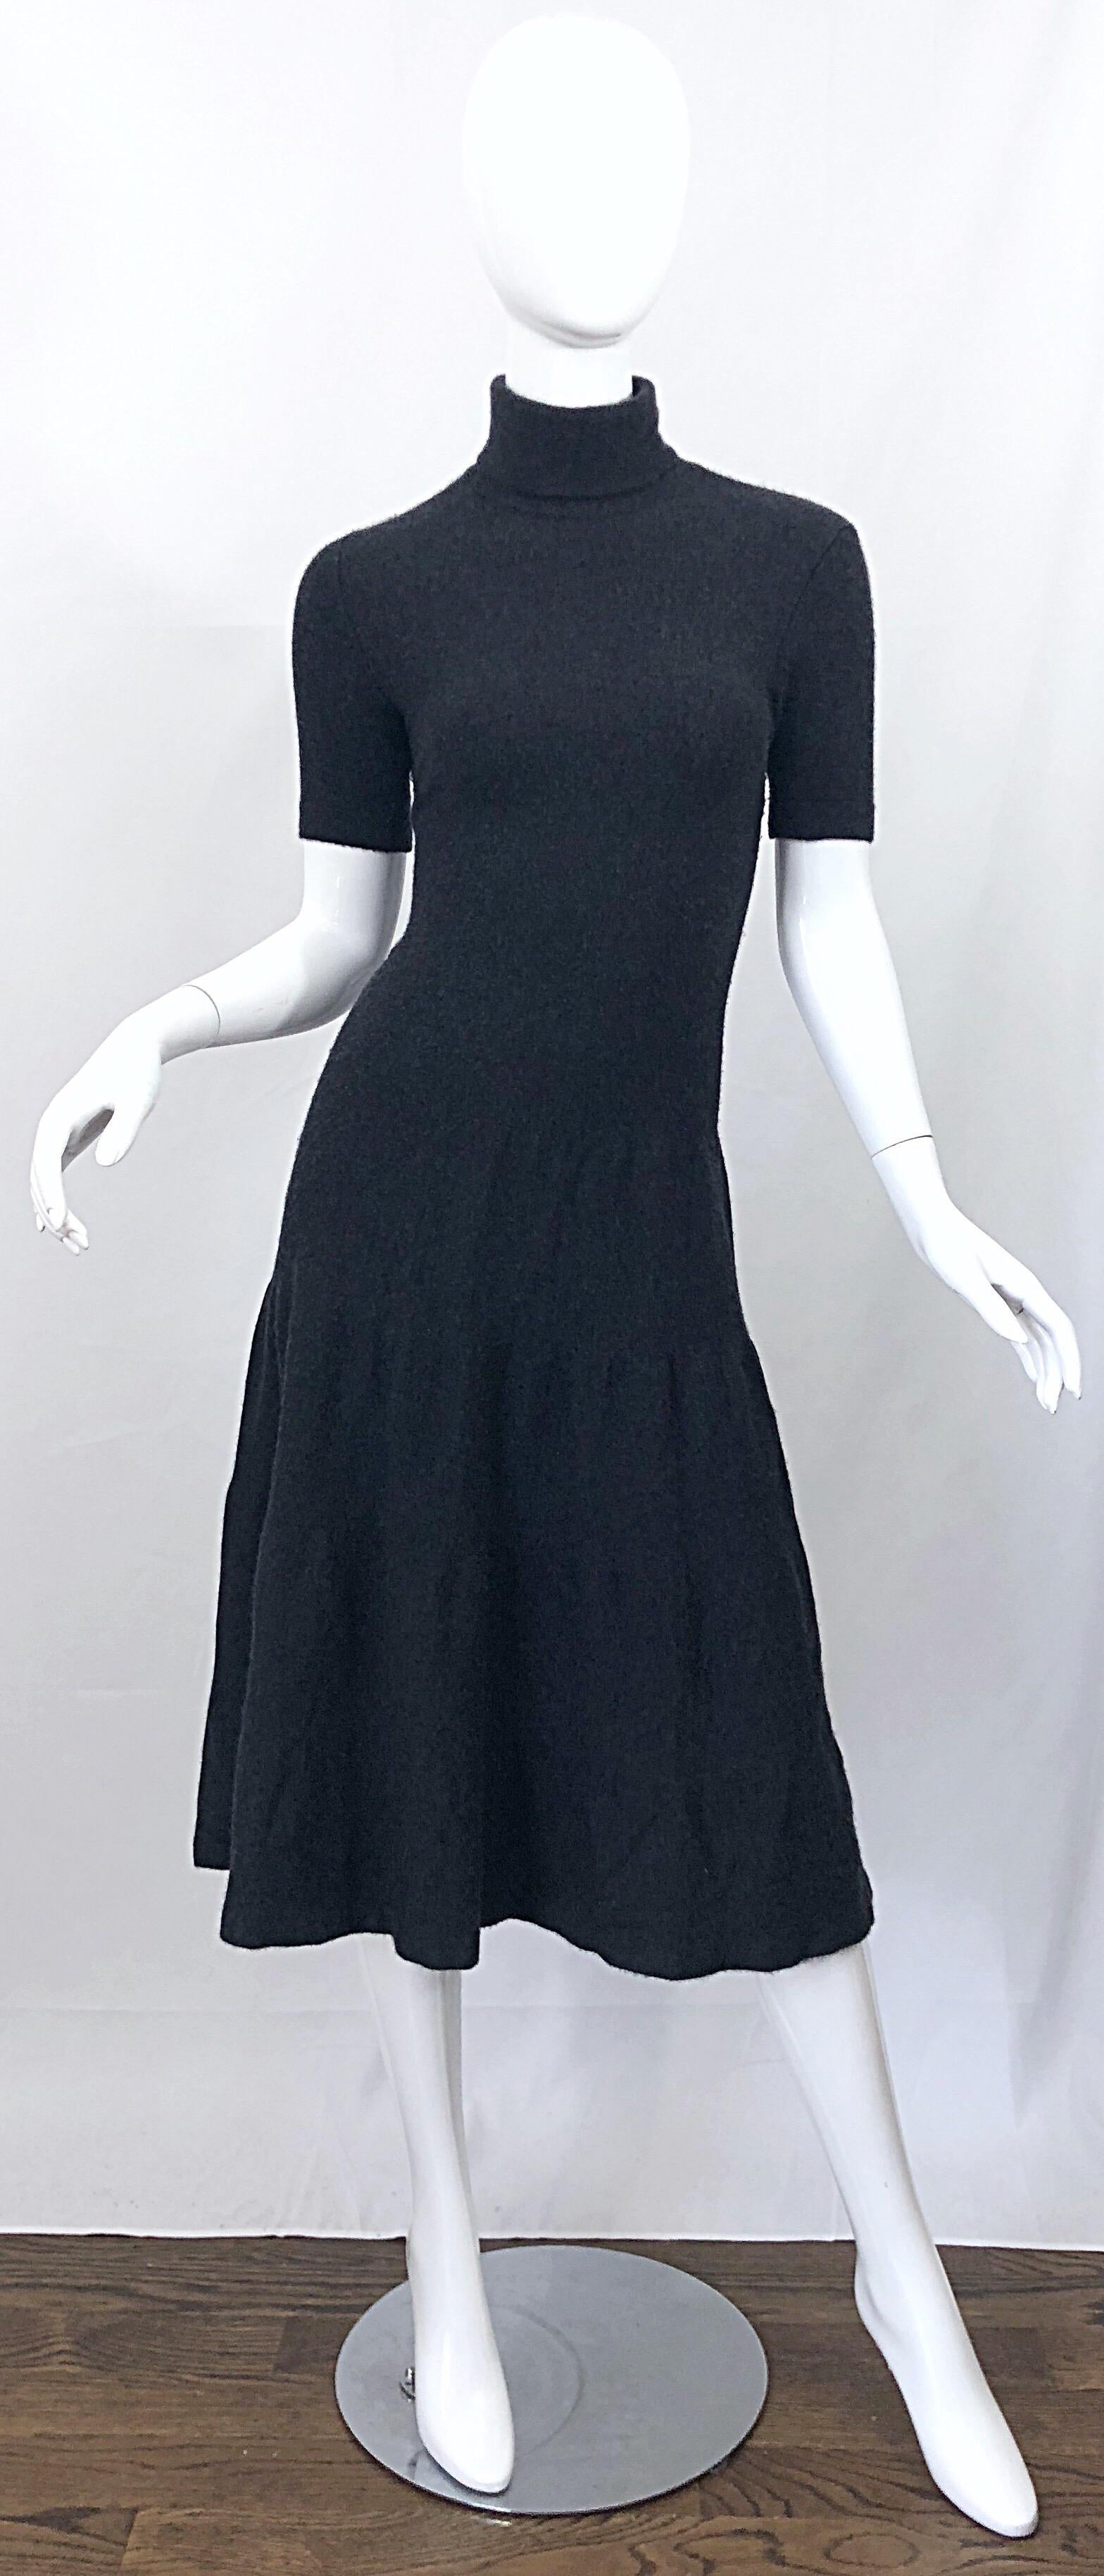 Chic late 1990s RALPH LAURENT COLLECTION Purple Label charcoal grey cashmere short sleeve turtleneck sweater dress! Features the perfect color charcoal gray that can be worn with anything. The most incredibly soft cashmere that you will.  ever feel!